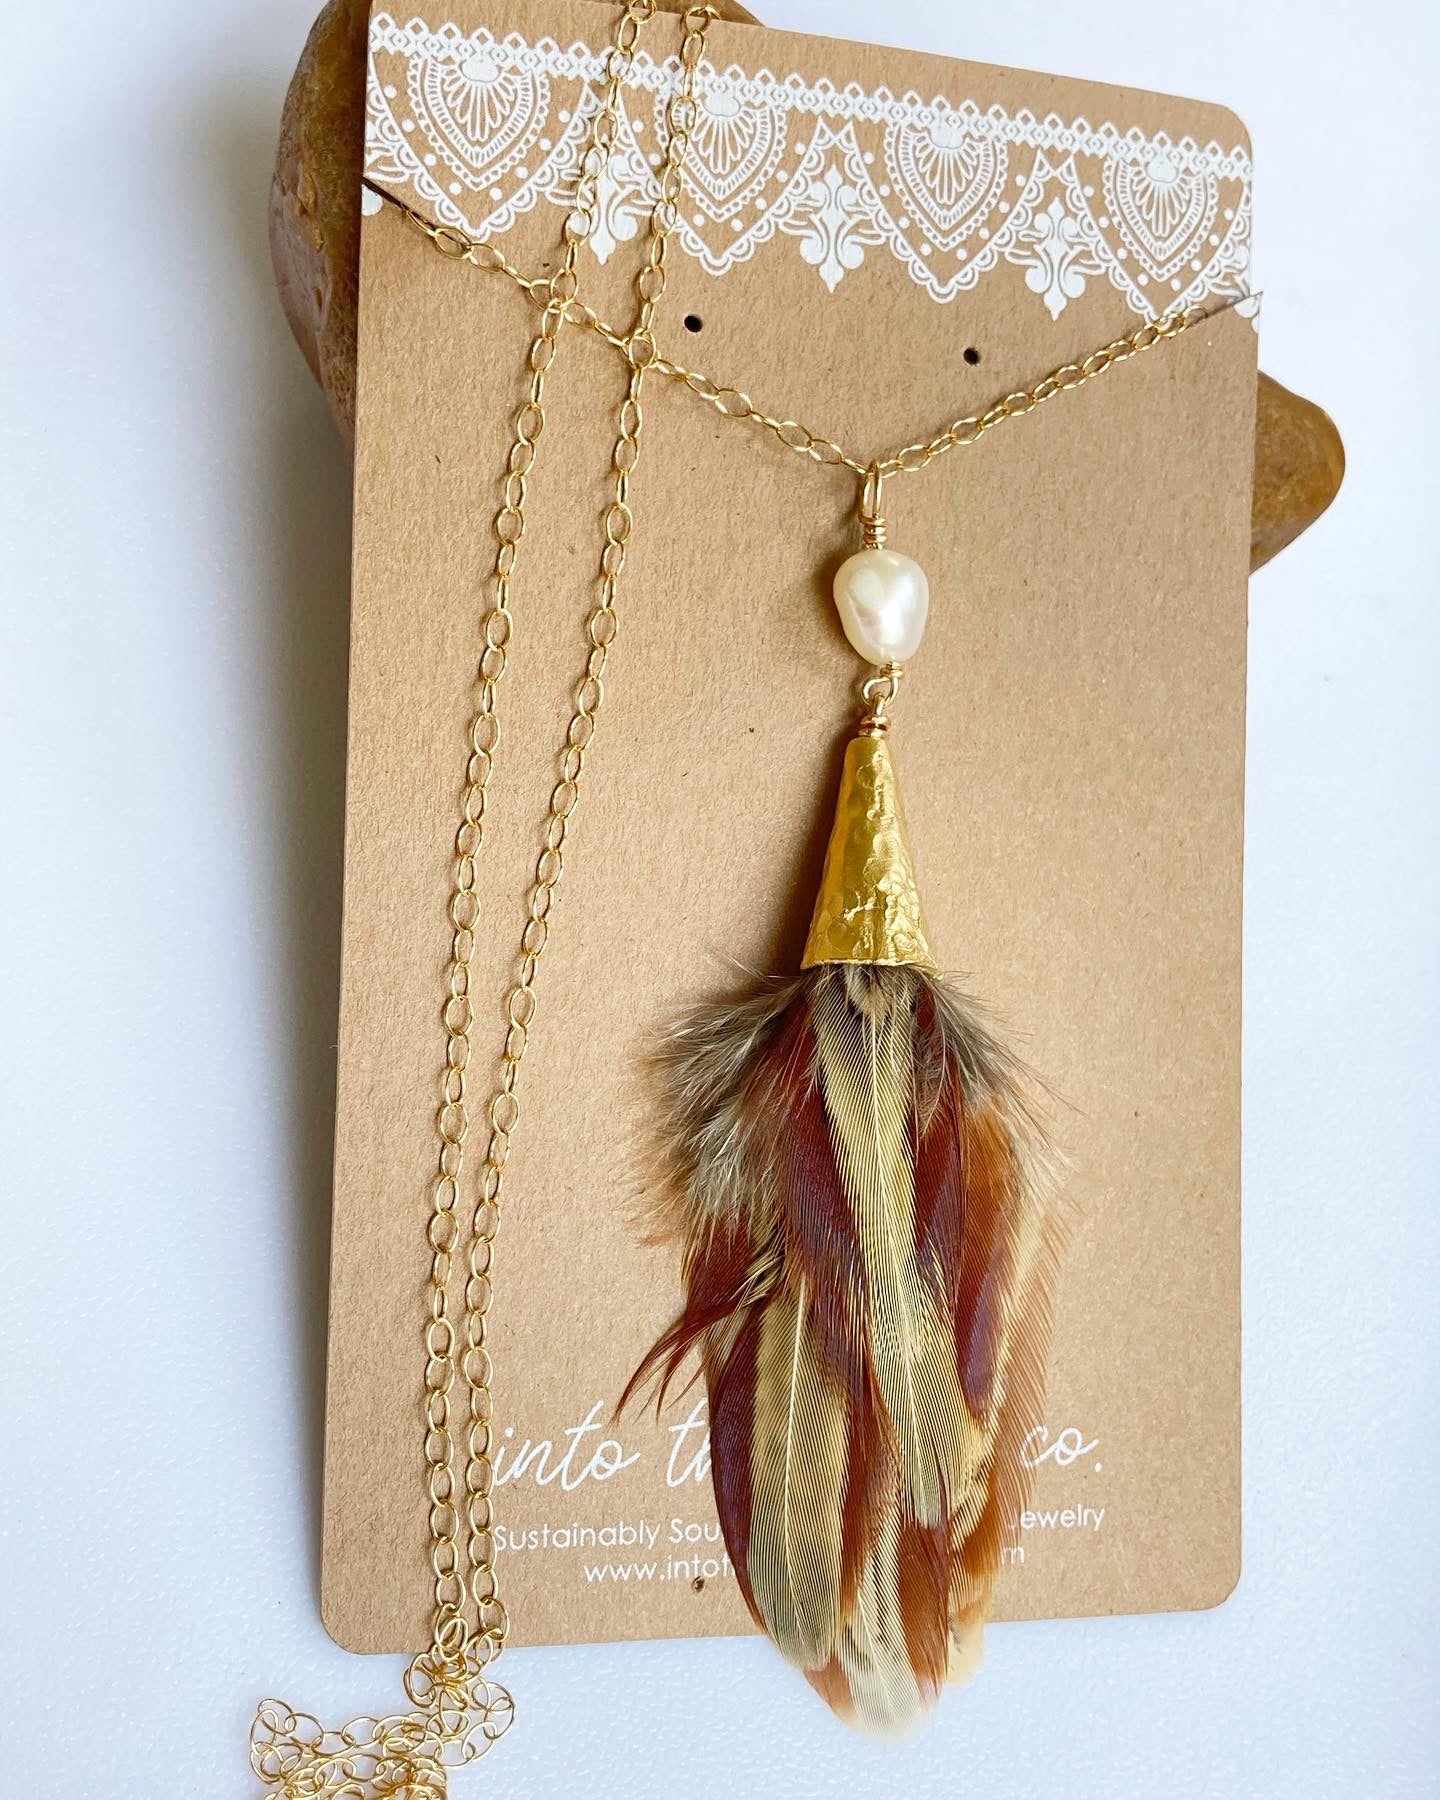 Gatsby Necklace | Pearl | Pheasant